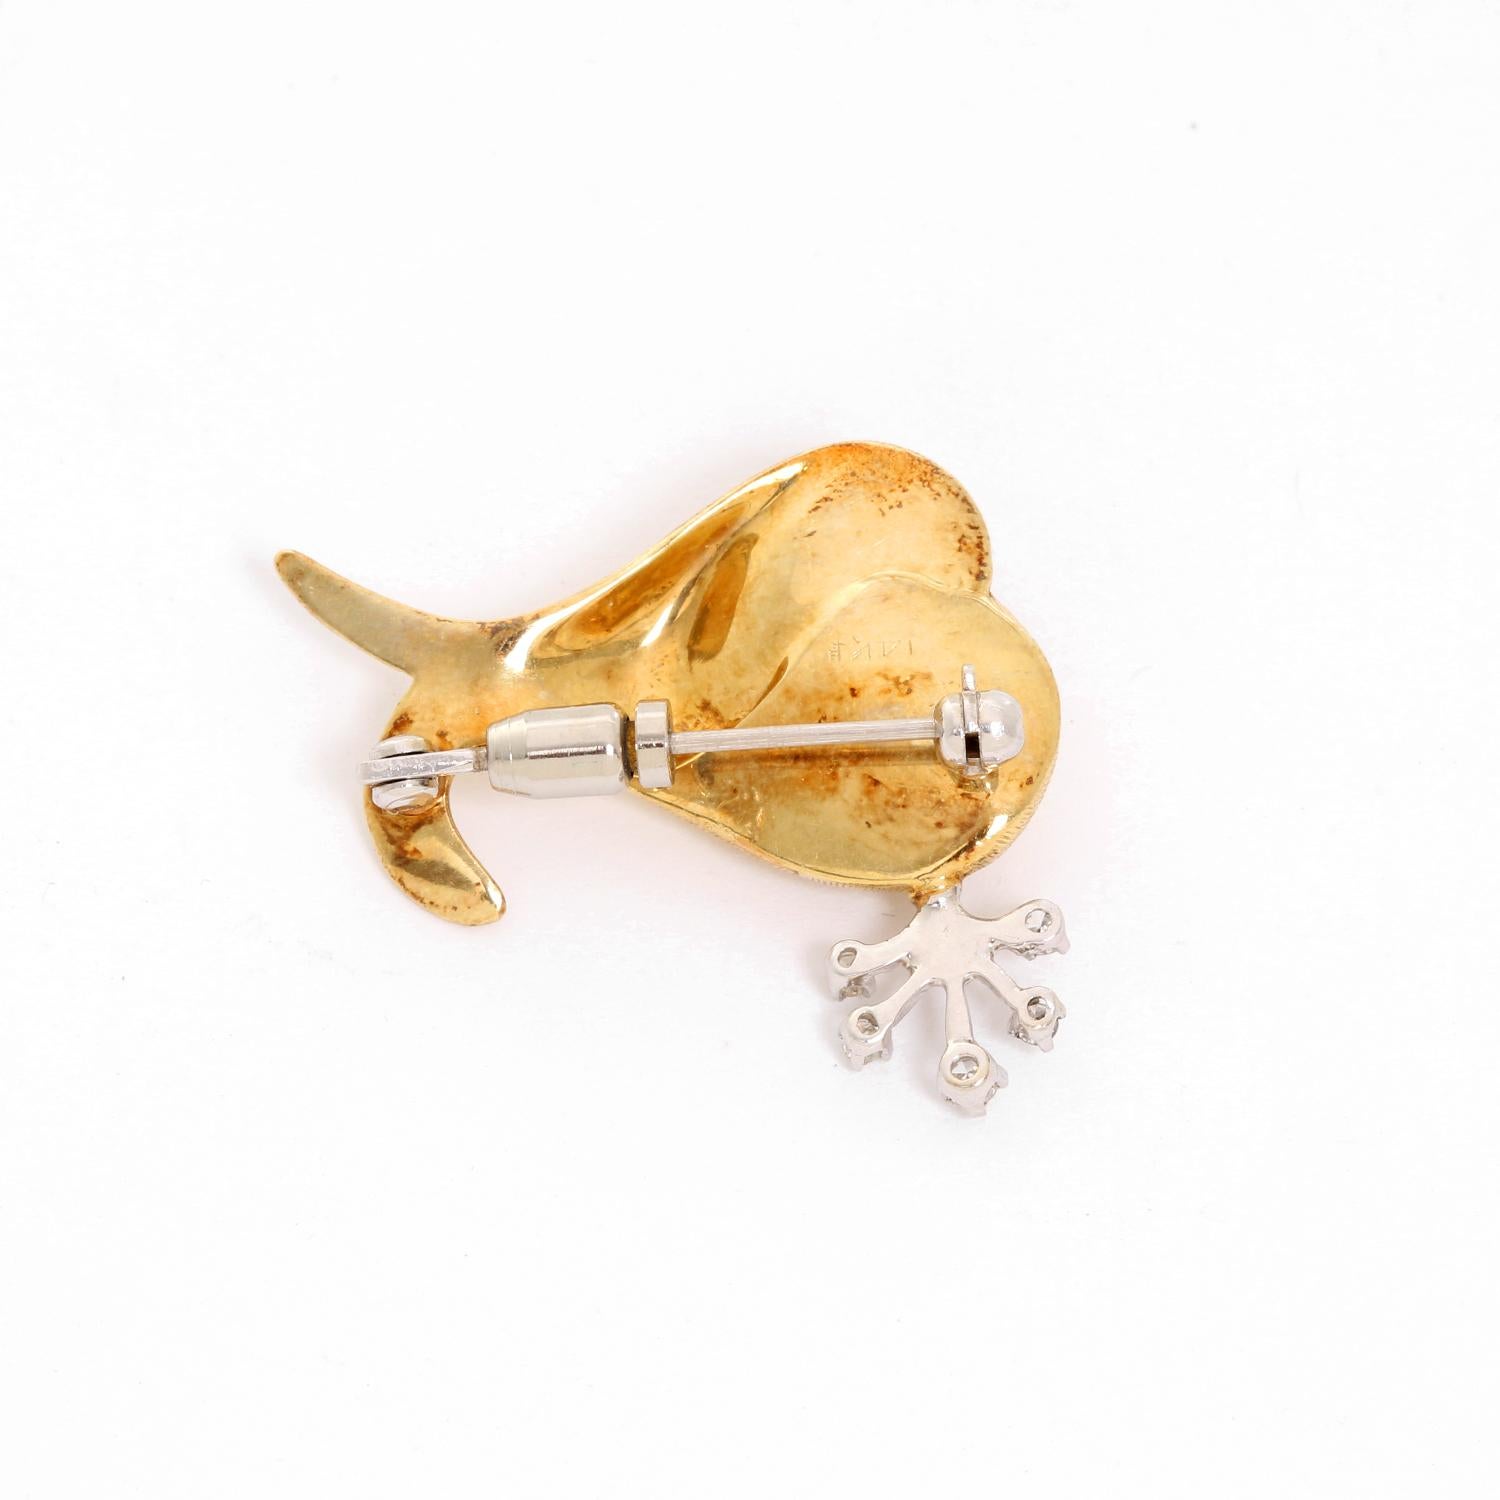 14K Yellow Gold Whale Brooch  - Single cut diamonds set on 14K yellow gold with a ruby on the whale. Diamond approx weight .10 cts. Total grams 5.57. Total length 27 mm x 22 mm .